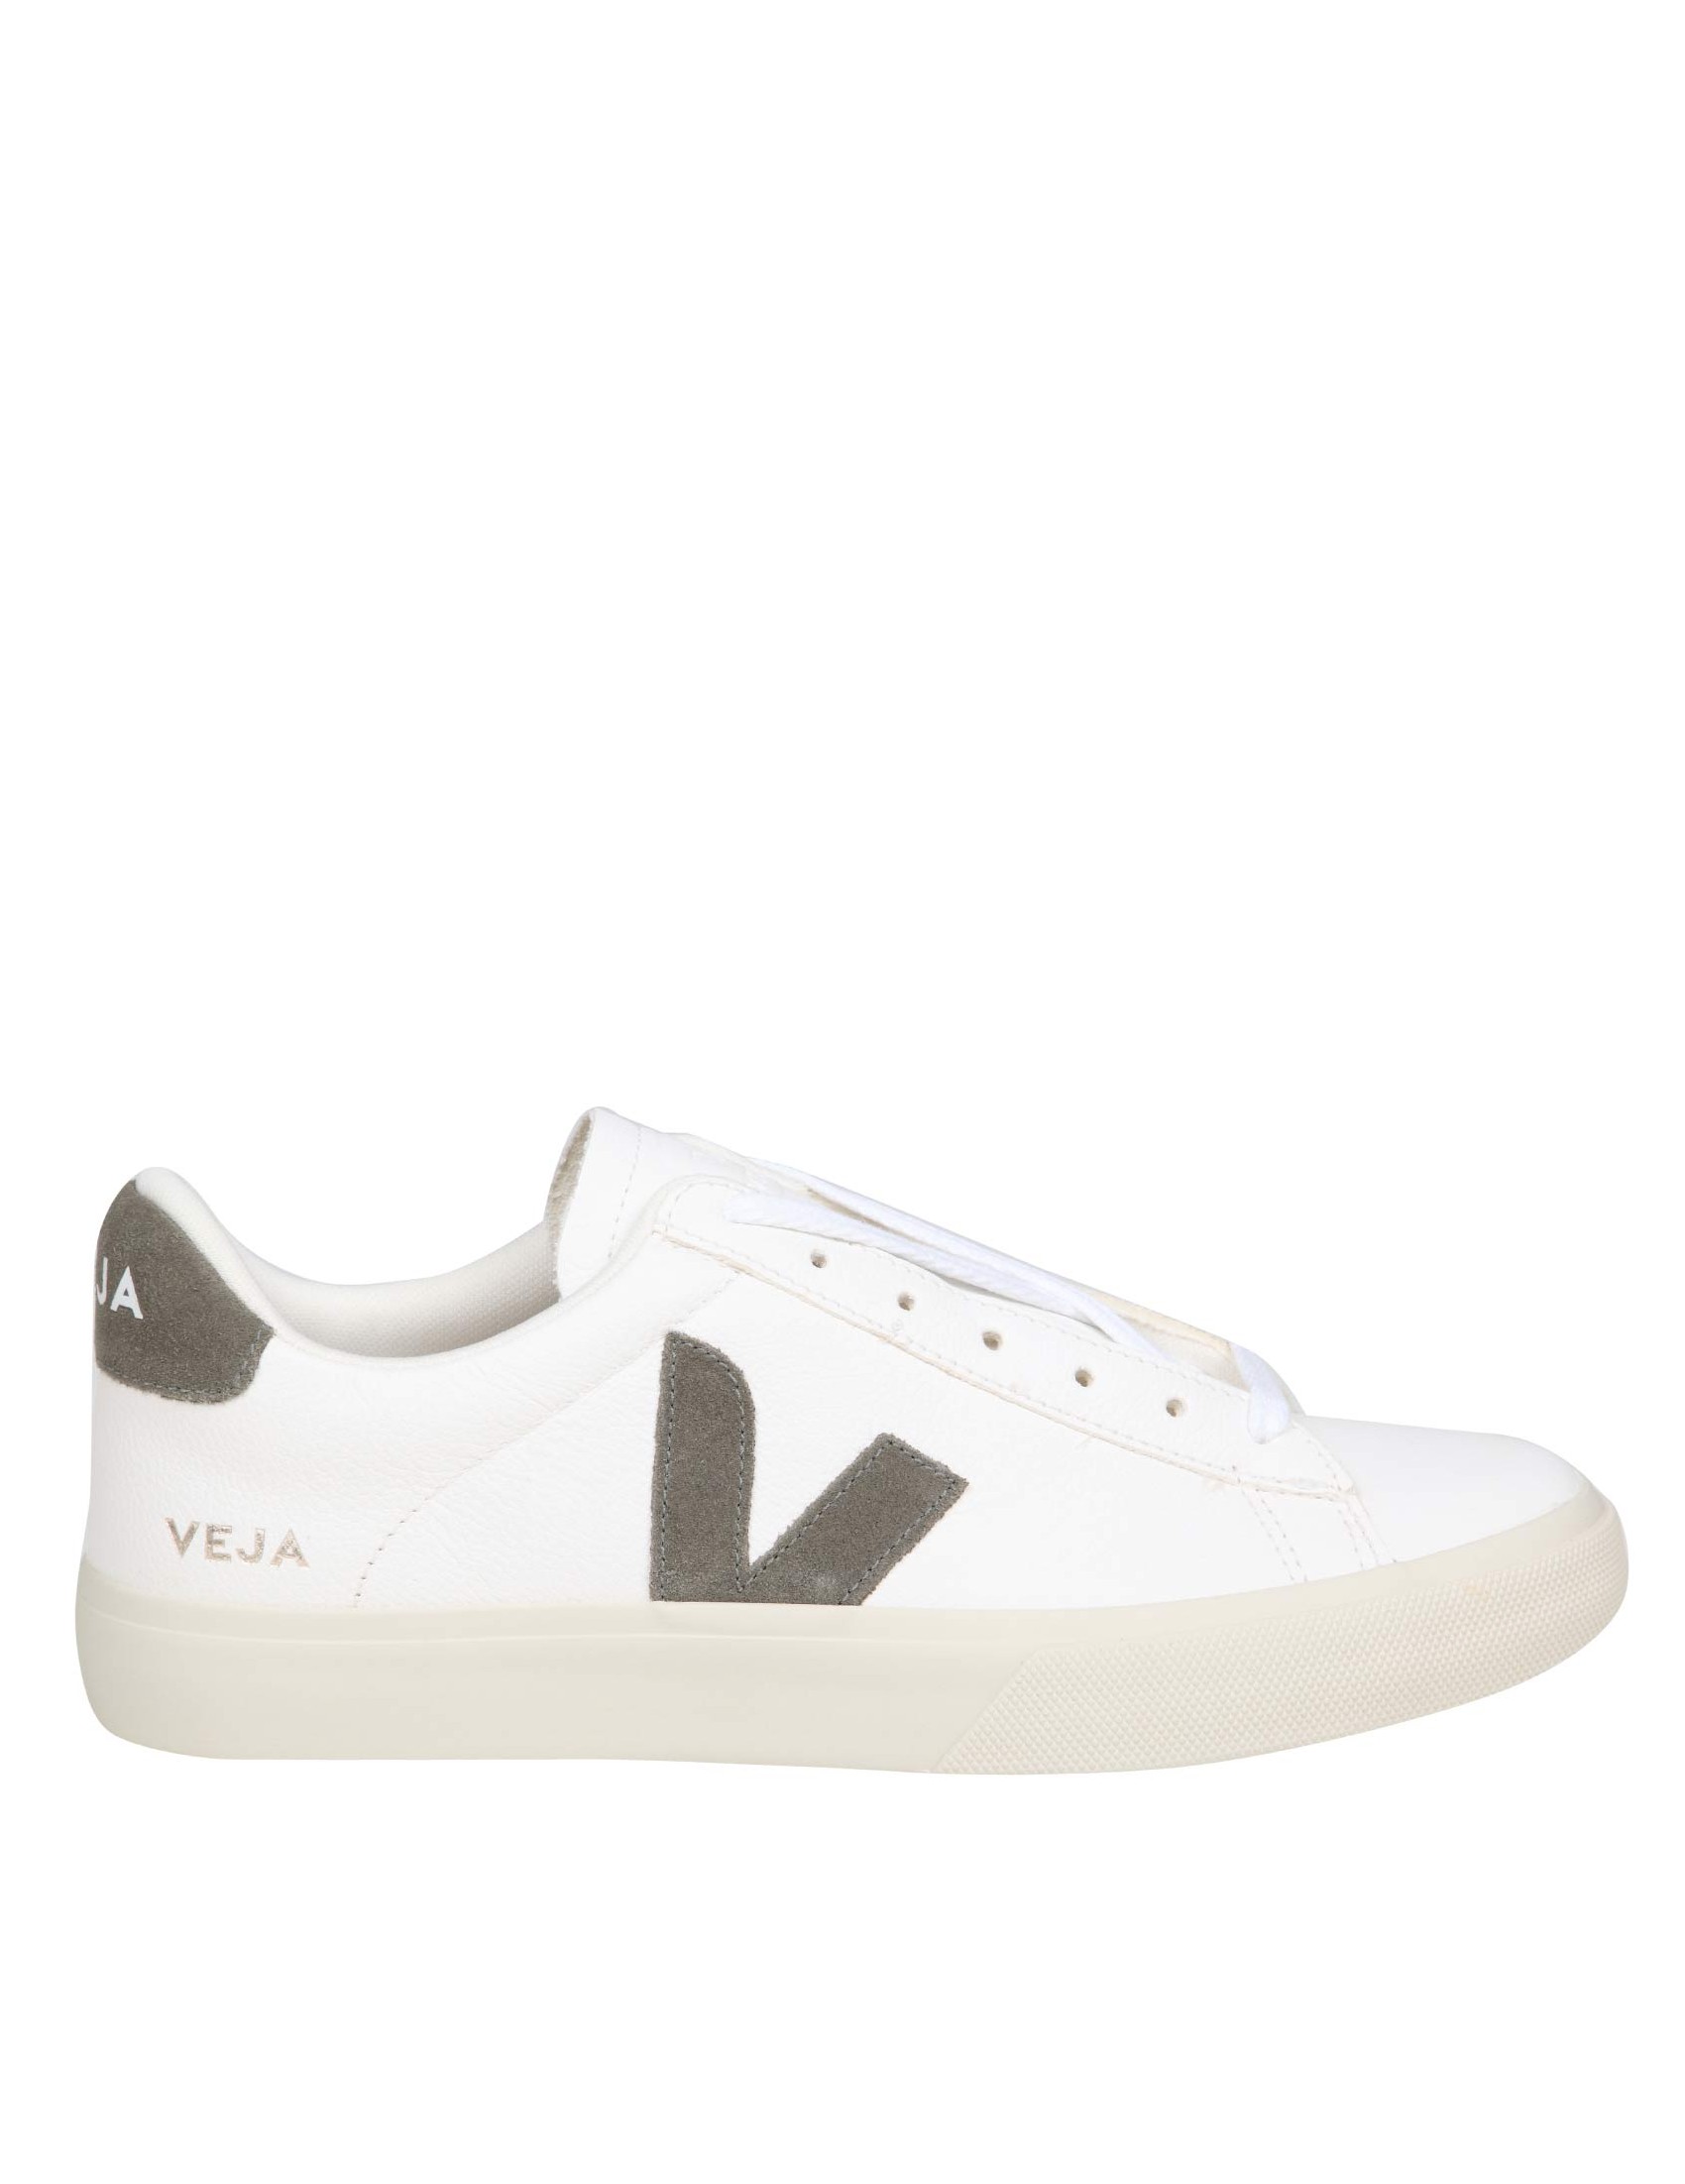 VEJA SNEAKERS IN WHITE AND GREEN LEATHER